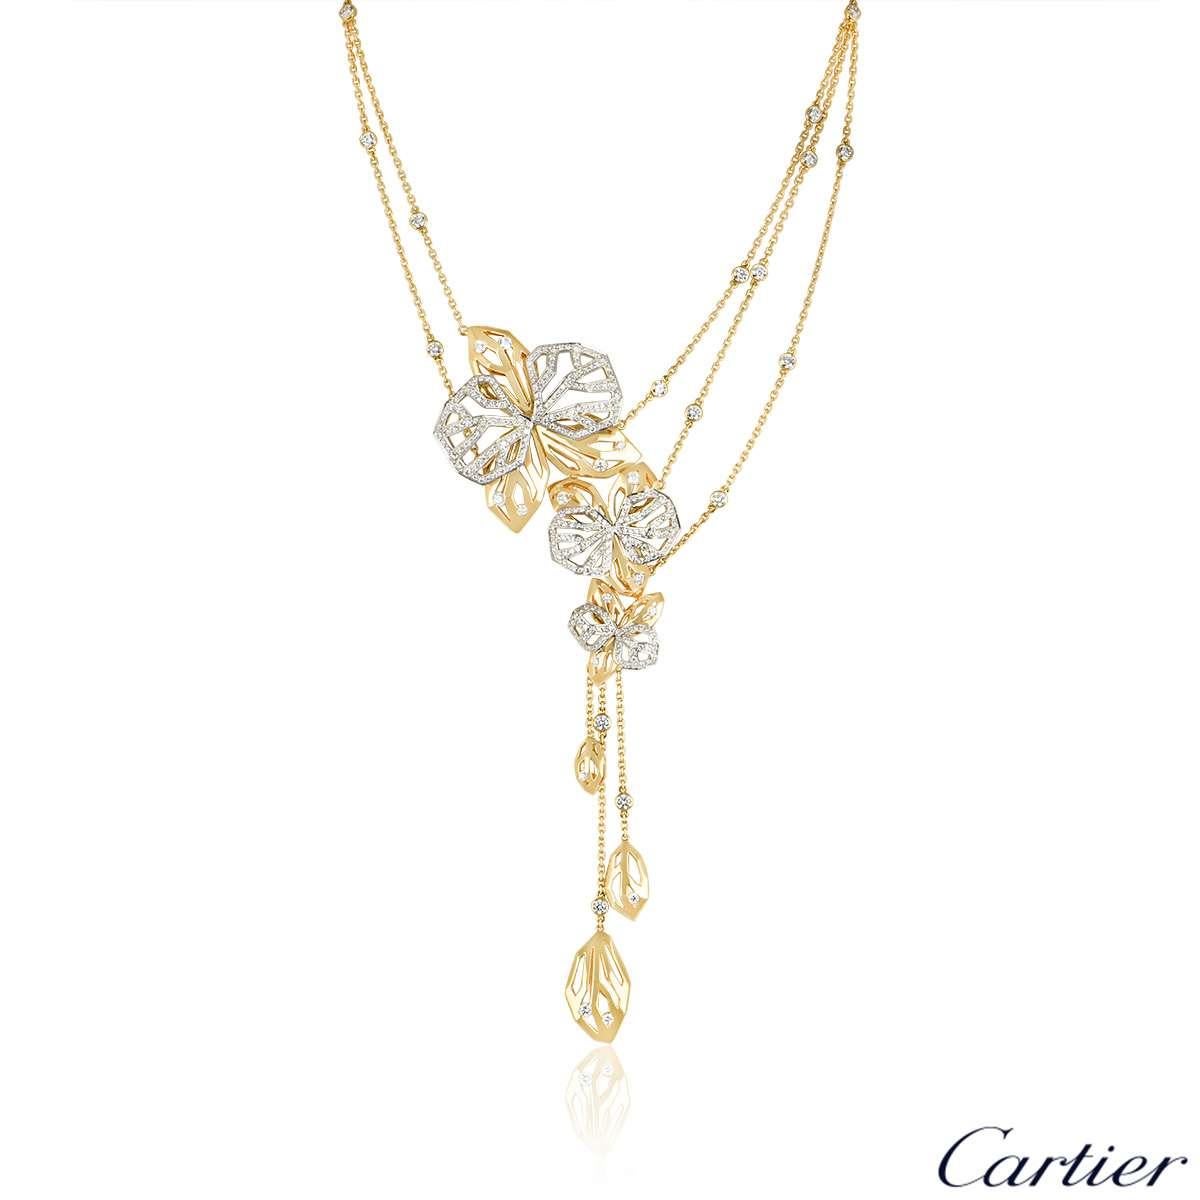 A rare 18k yellow and white gold necklace and ring suite from the Caresse d'Orchidees collection by Cartier. The ring and necklace are of openwork design and feature round brilliant cut diamonds. The ring has a total of approximately 1.60ct and the